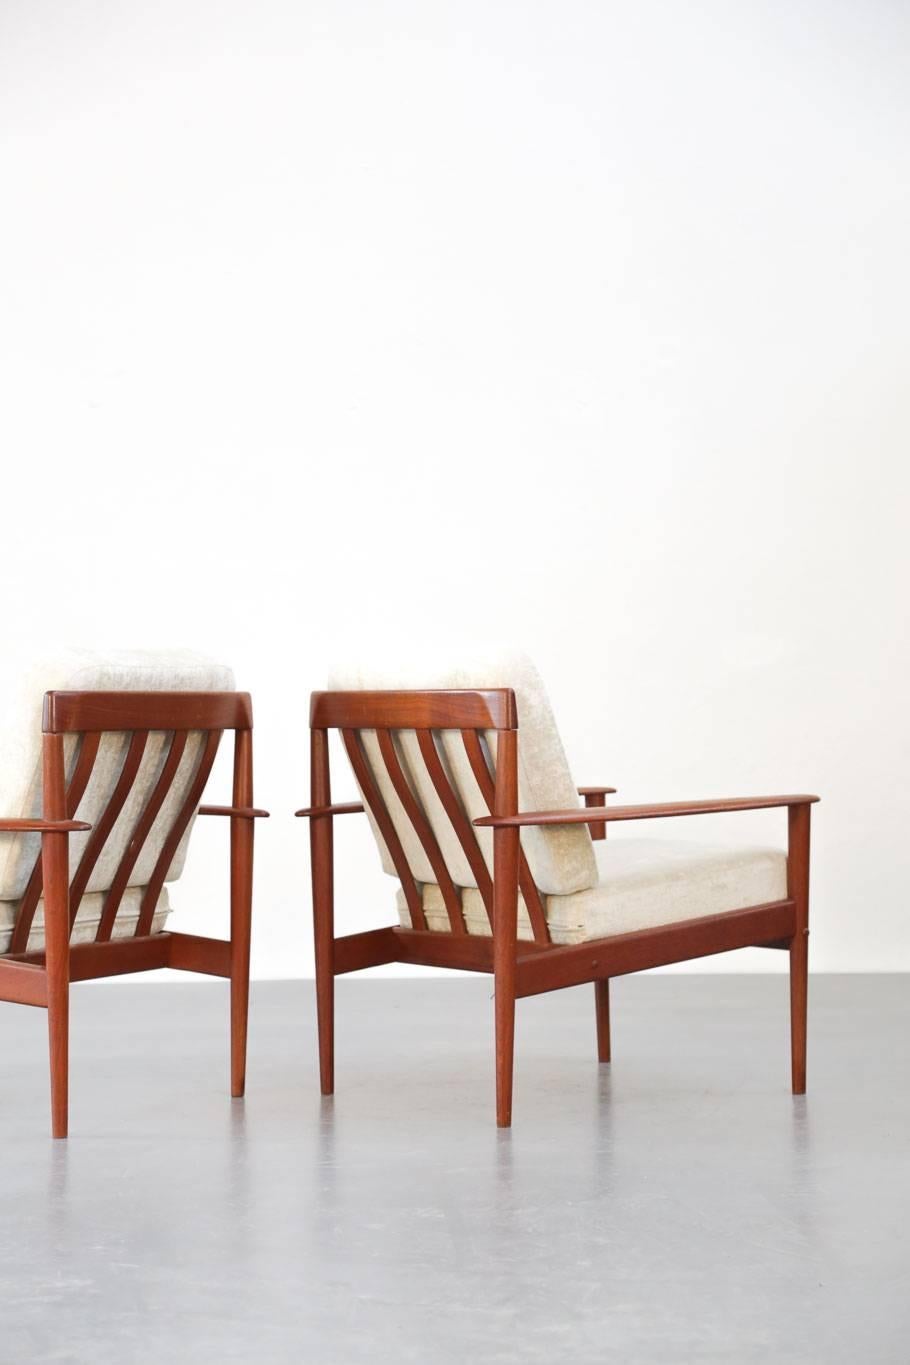 20th Century Pair of Lounge Chairs Grete Jalk Danish Teak, 1960s For Sale